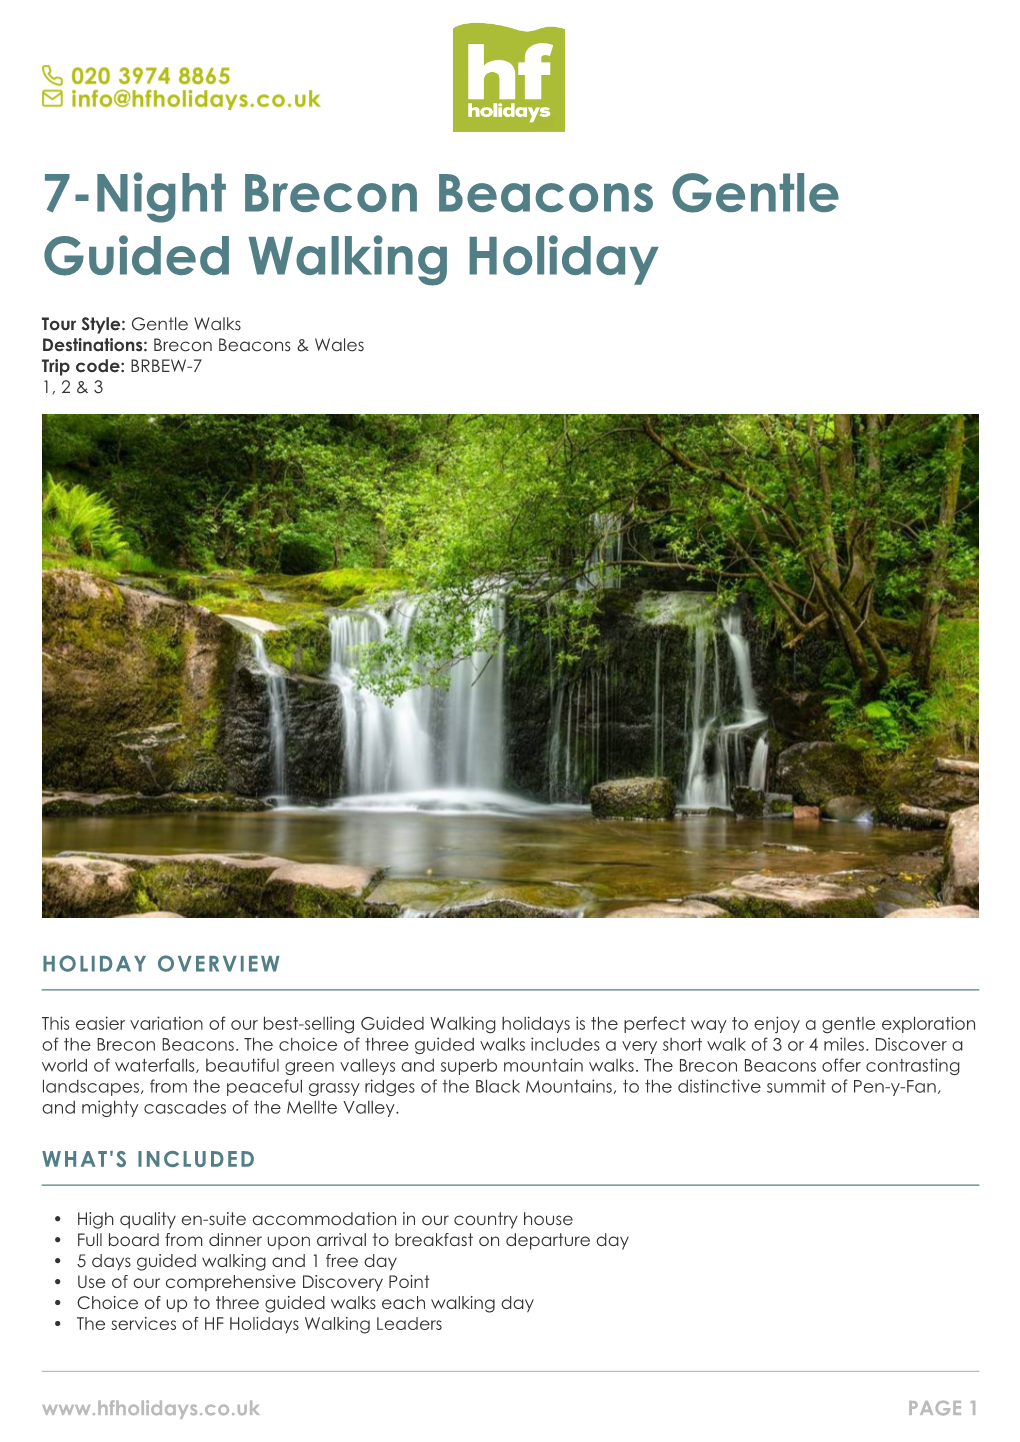 7-Night Brecon Beacons Gentle Guided Walking Holiday